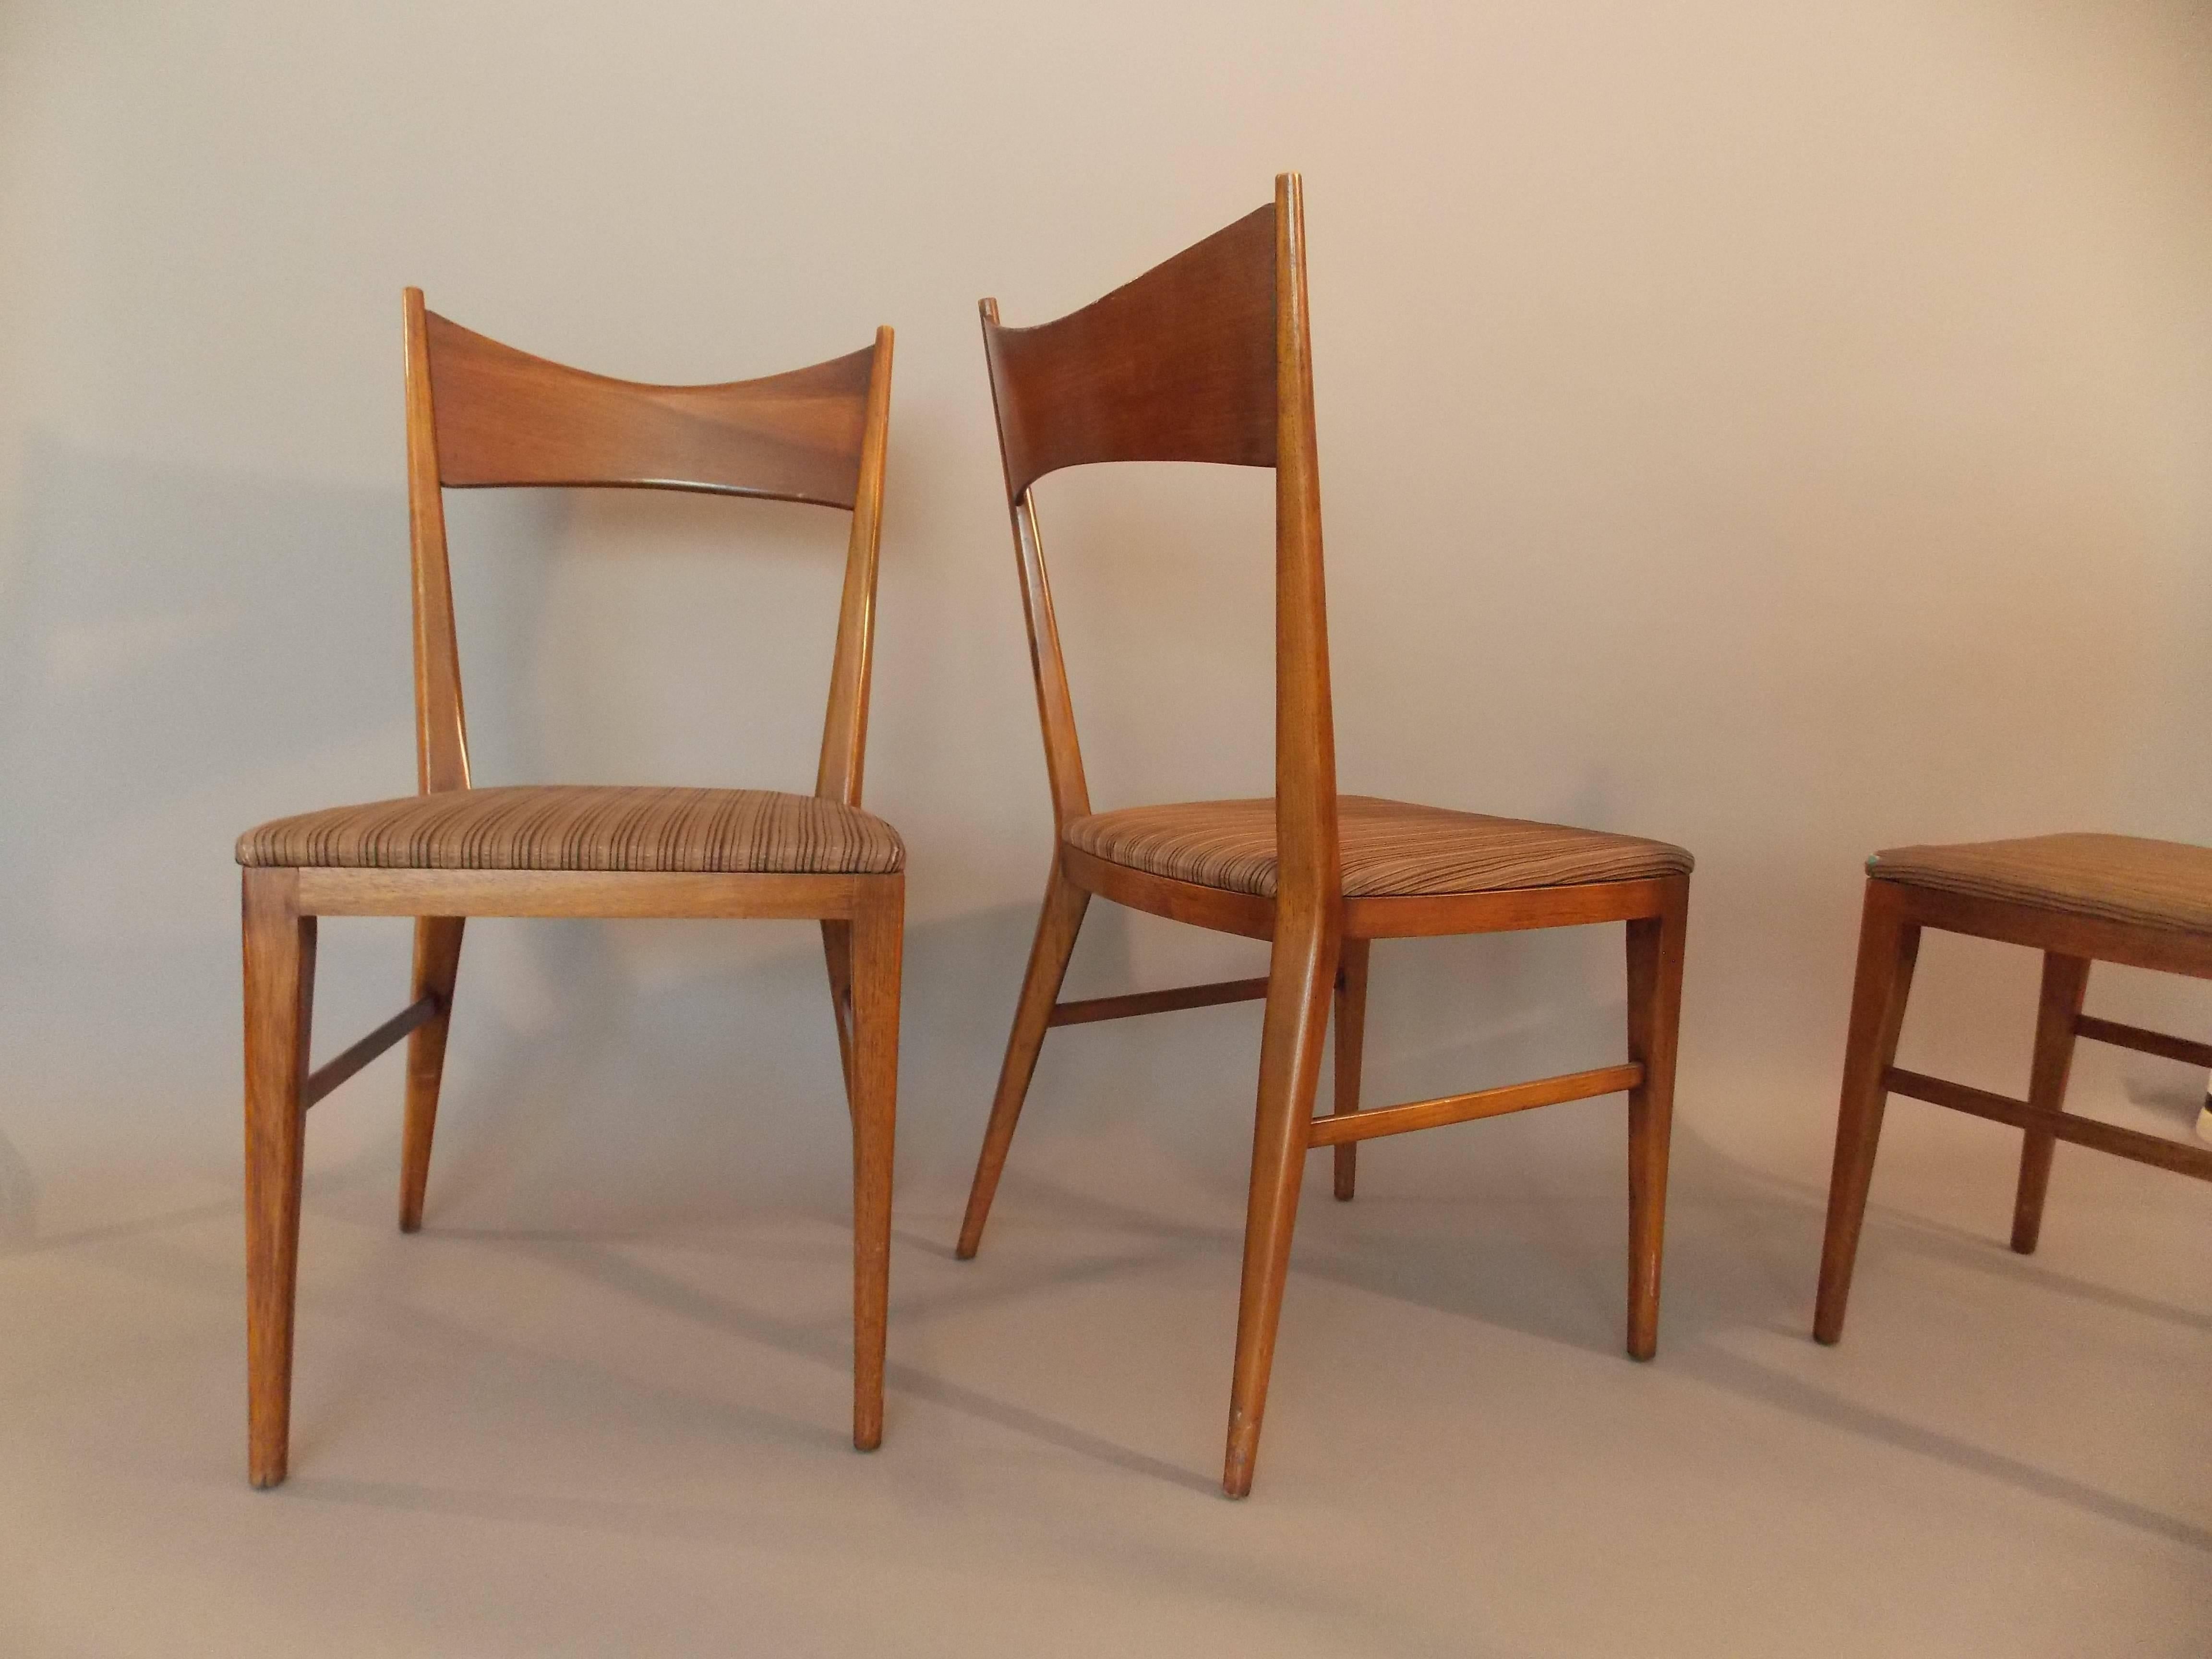 A nice set of modern designs. 
Made of walnut wood with upholstery.
They are in the original vintage condition showing minor ware consistent with age.
The wood has a beautiful patina, but the seats can use a new upholstery.
No major damage.
Solid